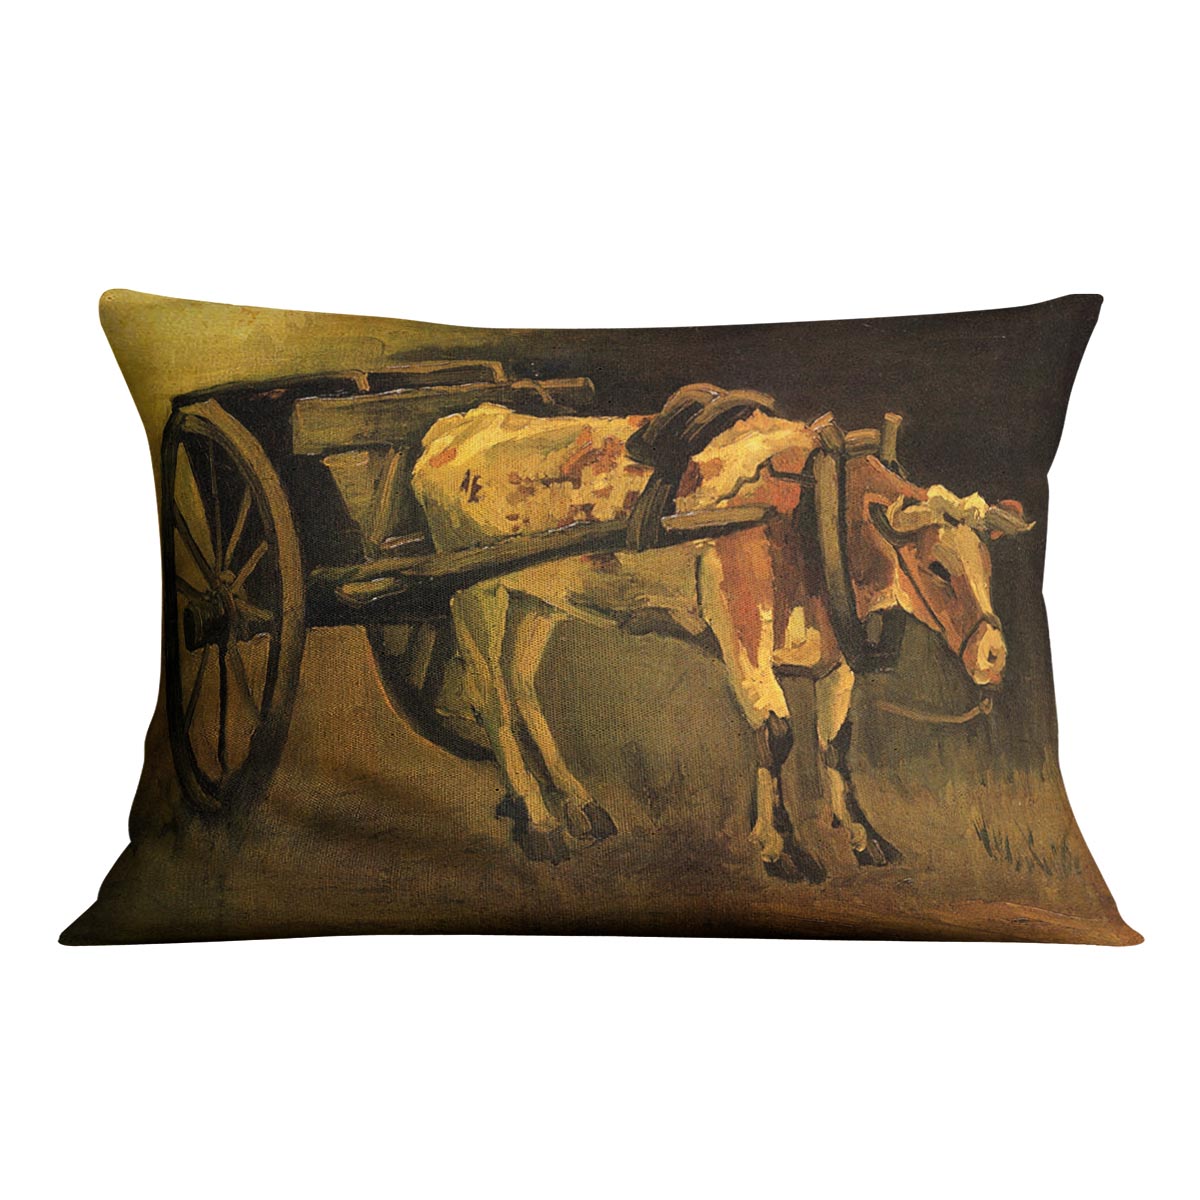 Cart with Red and White Ox by Van Gogh Cushion